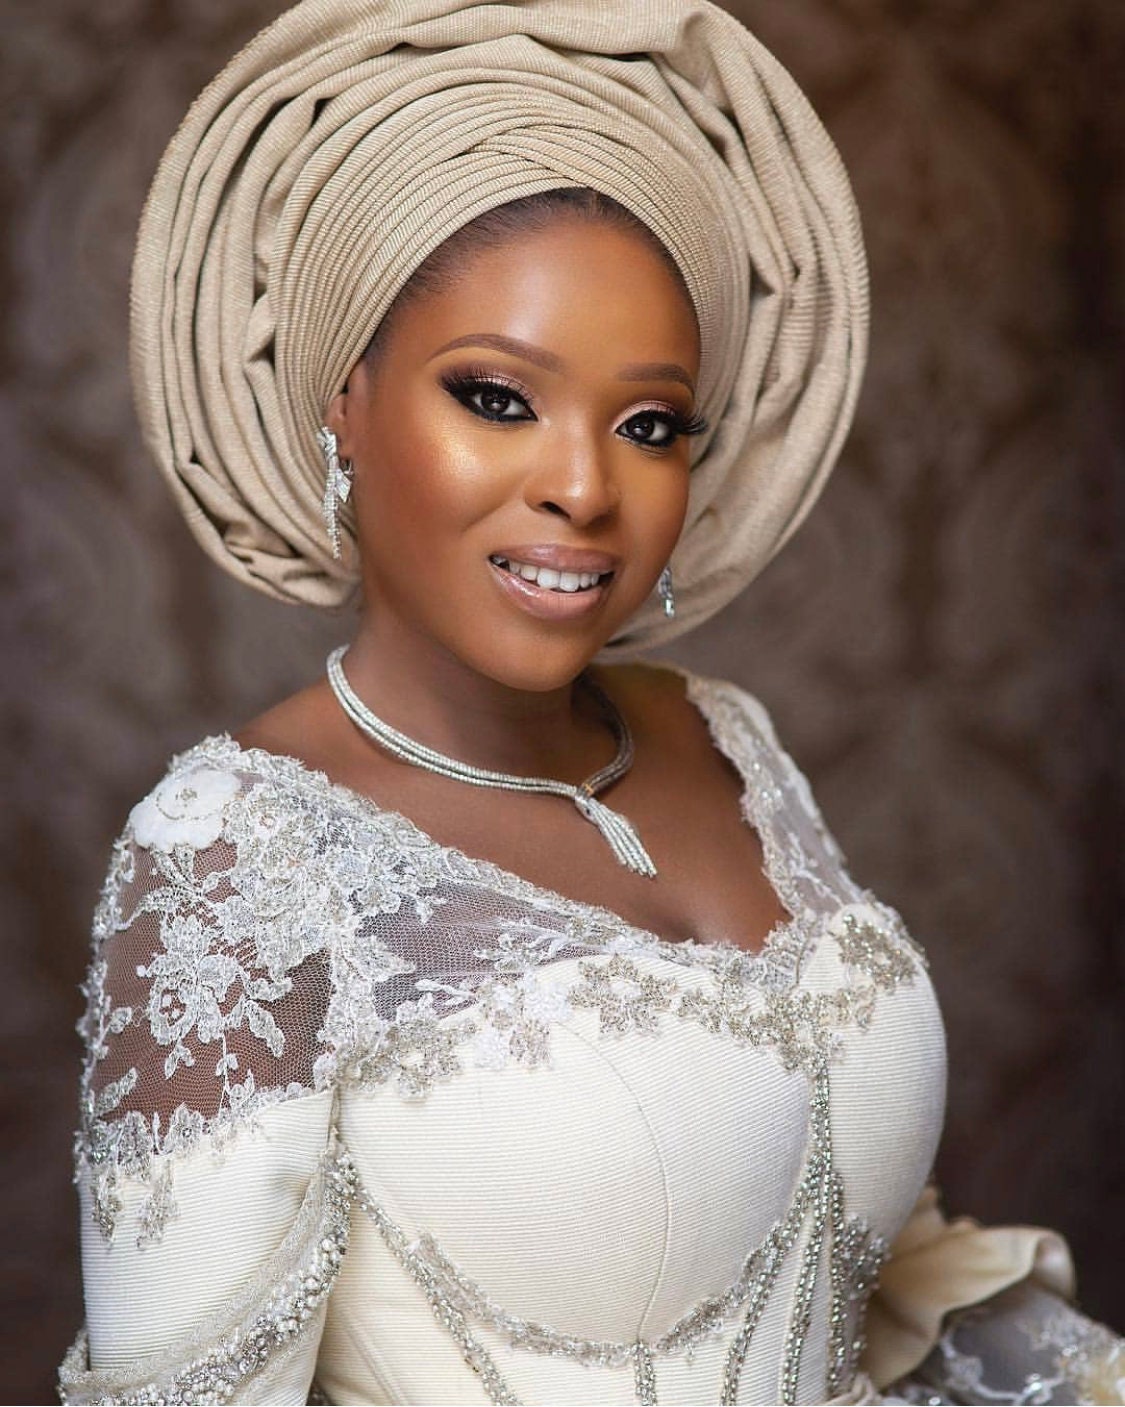 Aso Oke Champagne Gold prefect for Bride/Photoshoot Gele and Ipele headtie Fabric